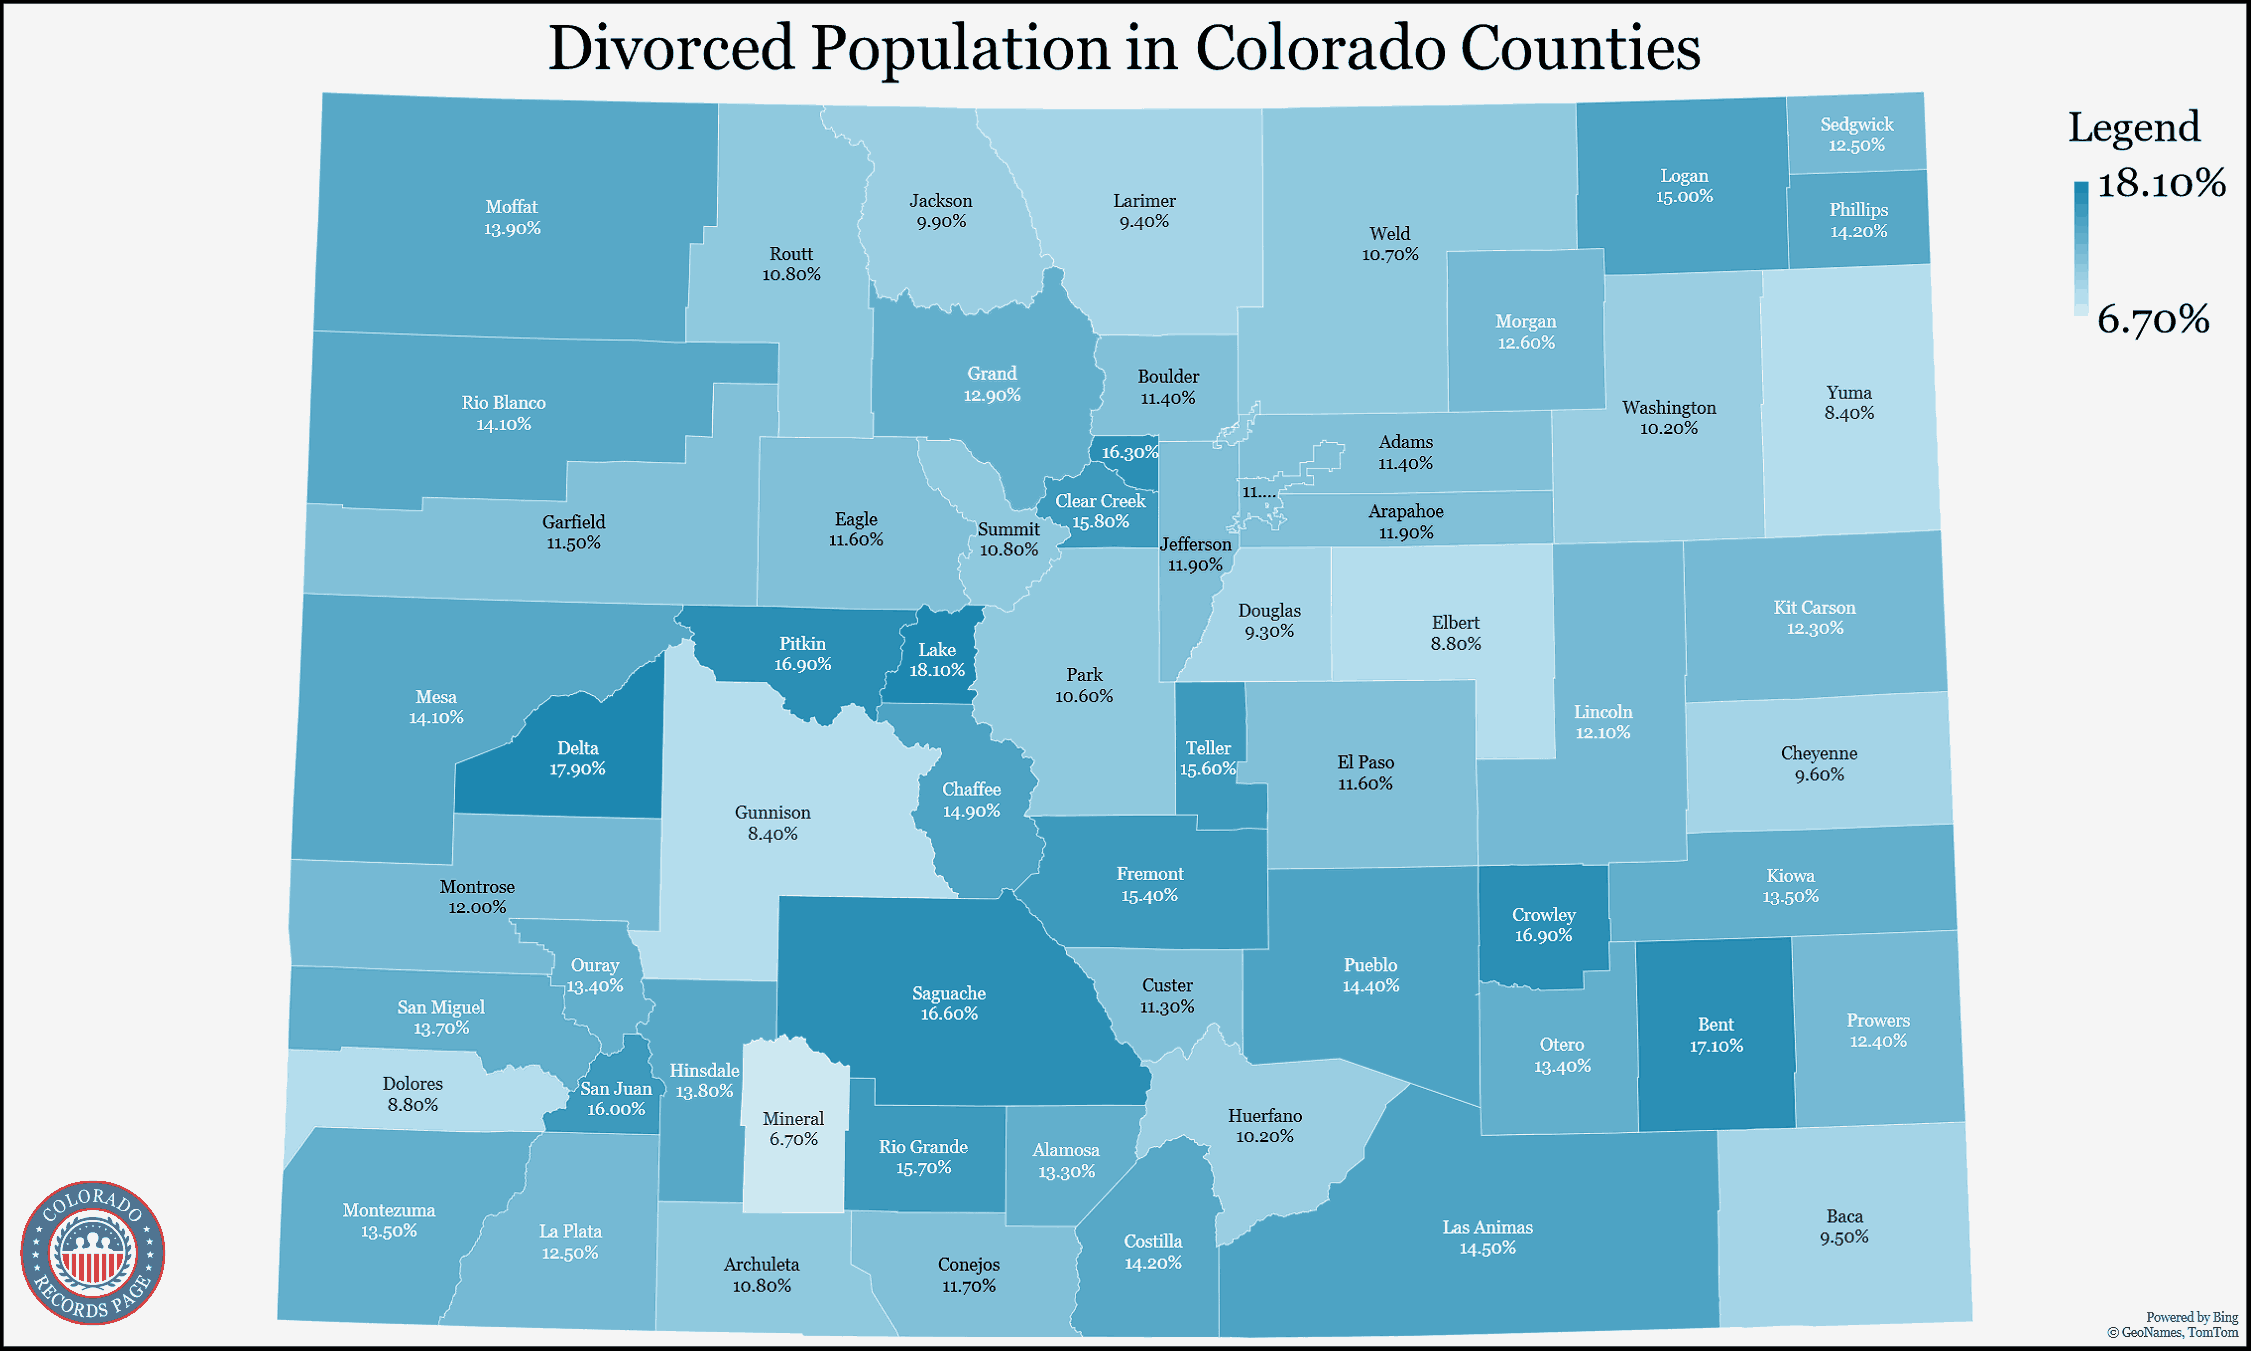 The map illustrates data from the United States Census Bureau and shows the percentage of divorced population in each county in Colorado and a legend is located at the top right corner indicating that the highest divorce number is 18.10% and the lowest is 6.70%.